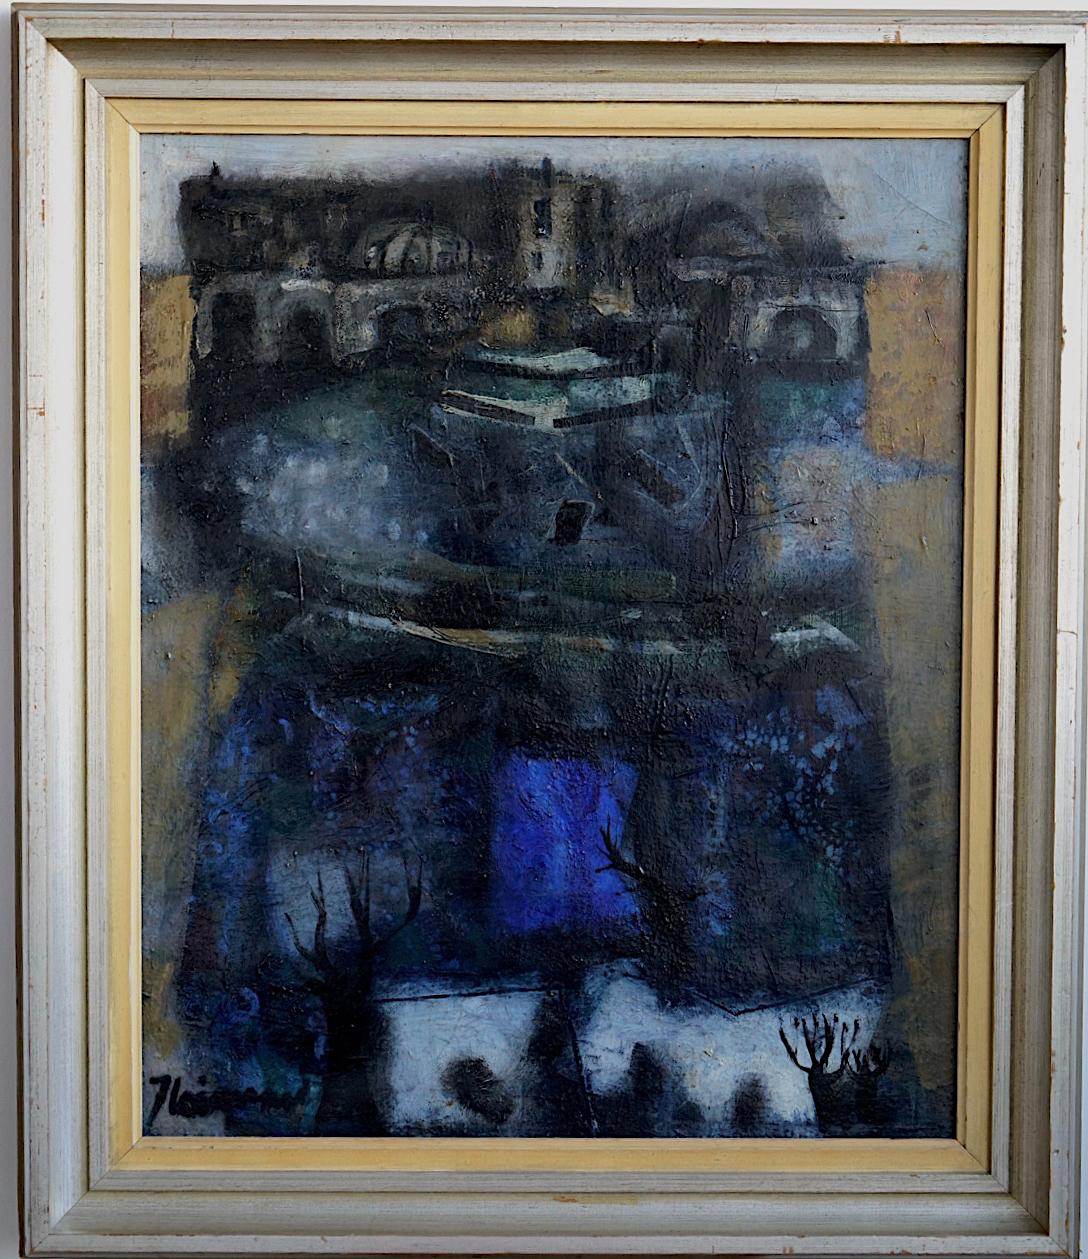 Cityscape oil on canvas painting by James Coignard, France (1925-2008).
Signed and framed. Early period.
Canvas size 28.5